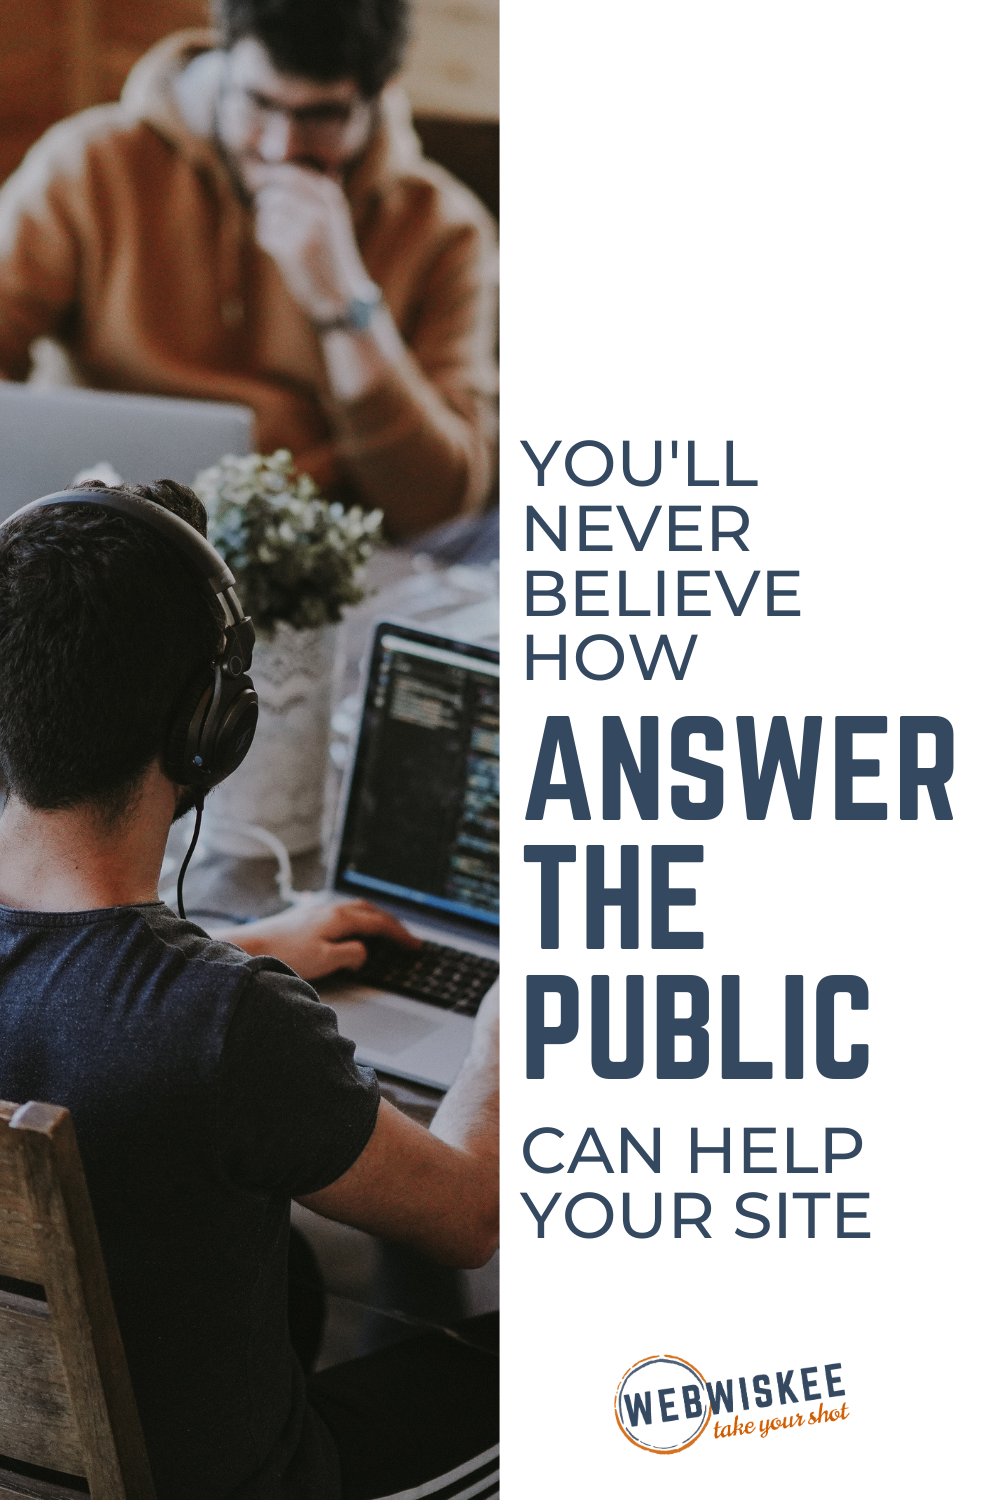 You'll Never Believe How Answer the Public Can Help Your Site by WebWiskee